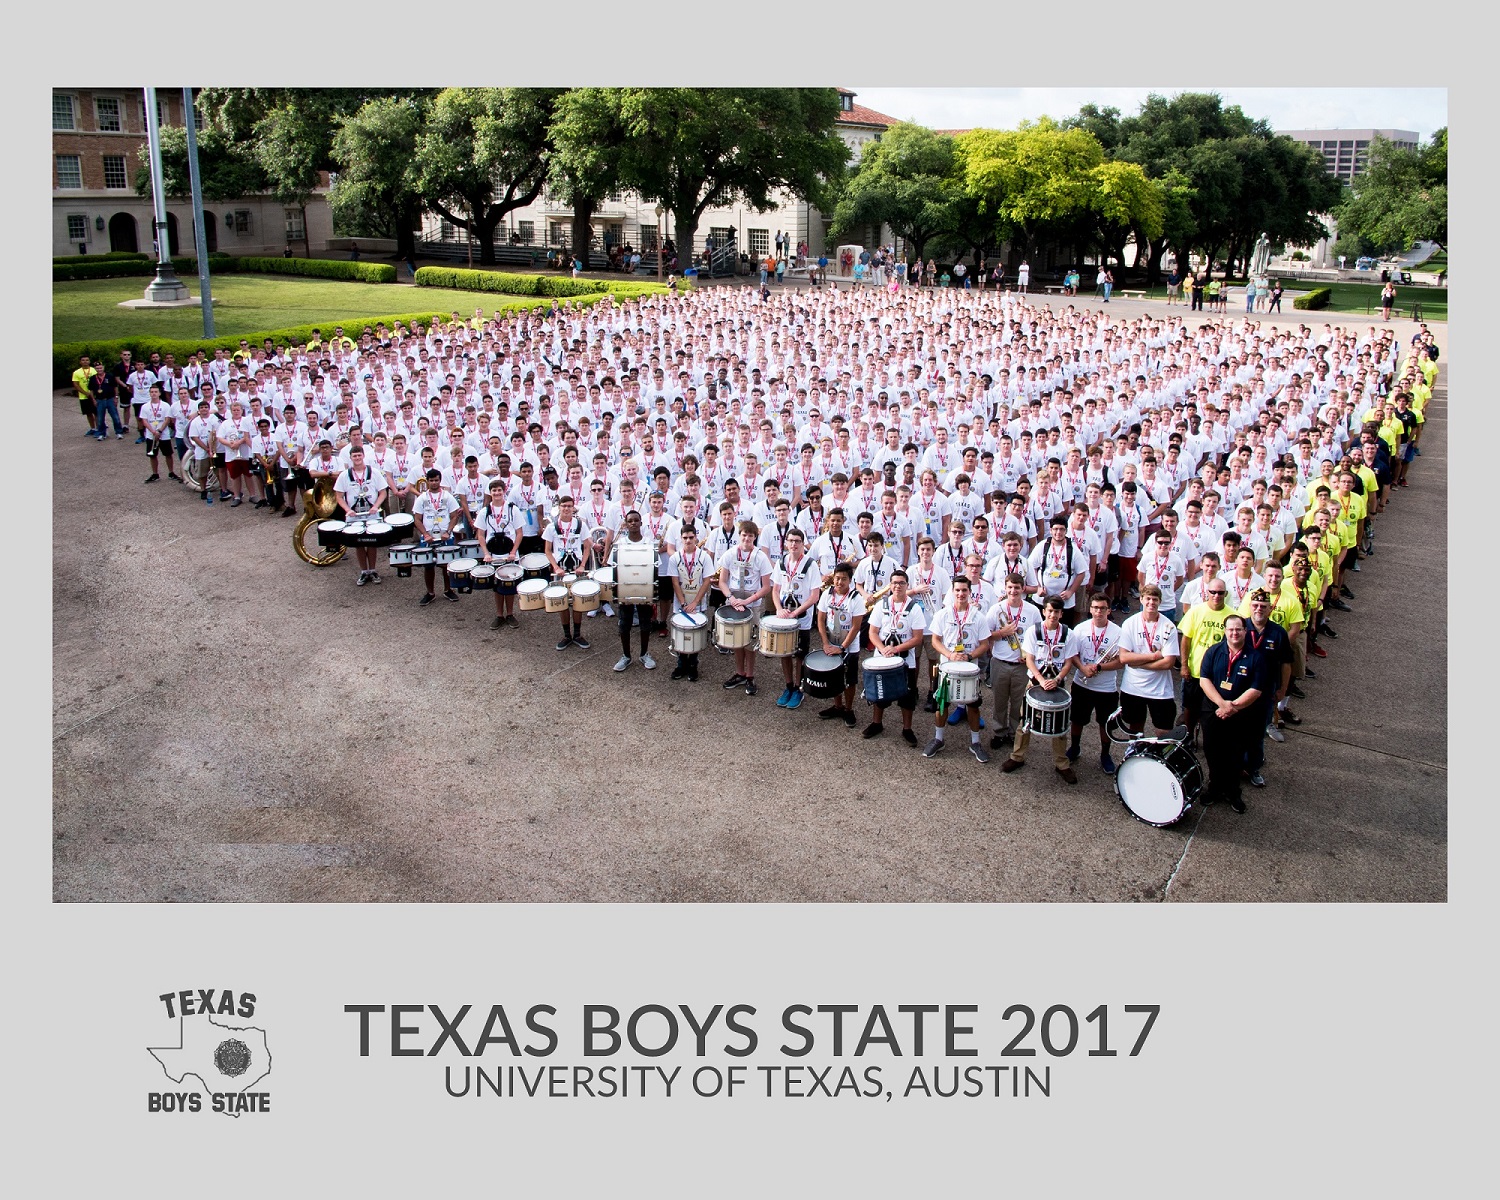 Premier High School of Granbury Student Attends Texas Boys State